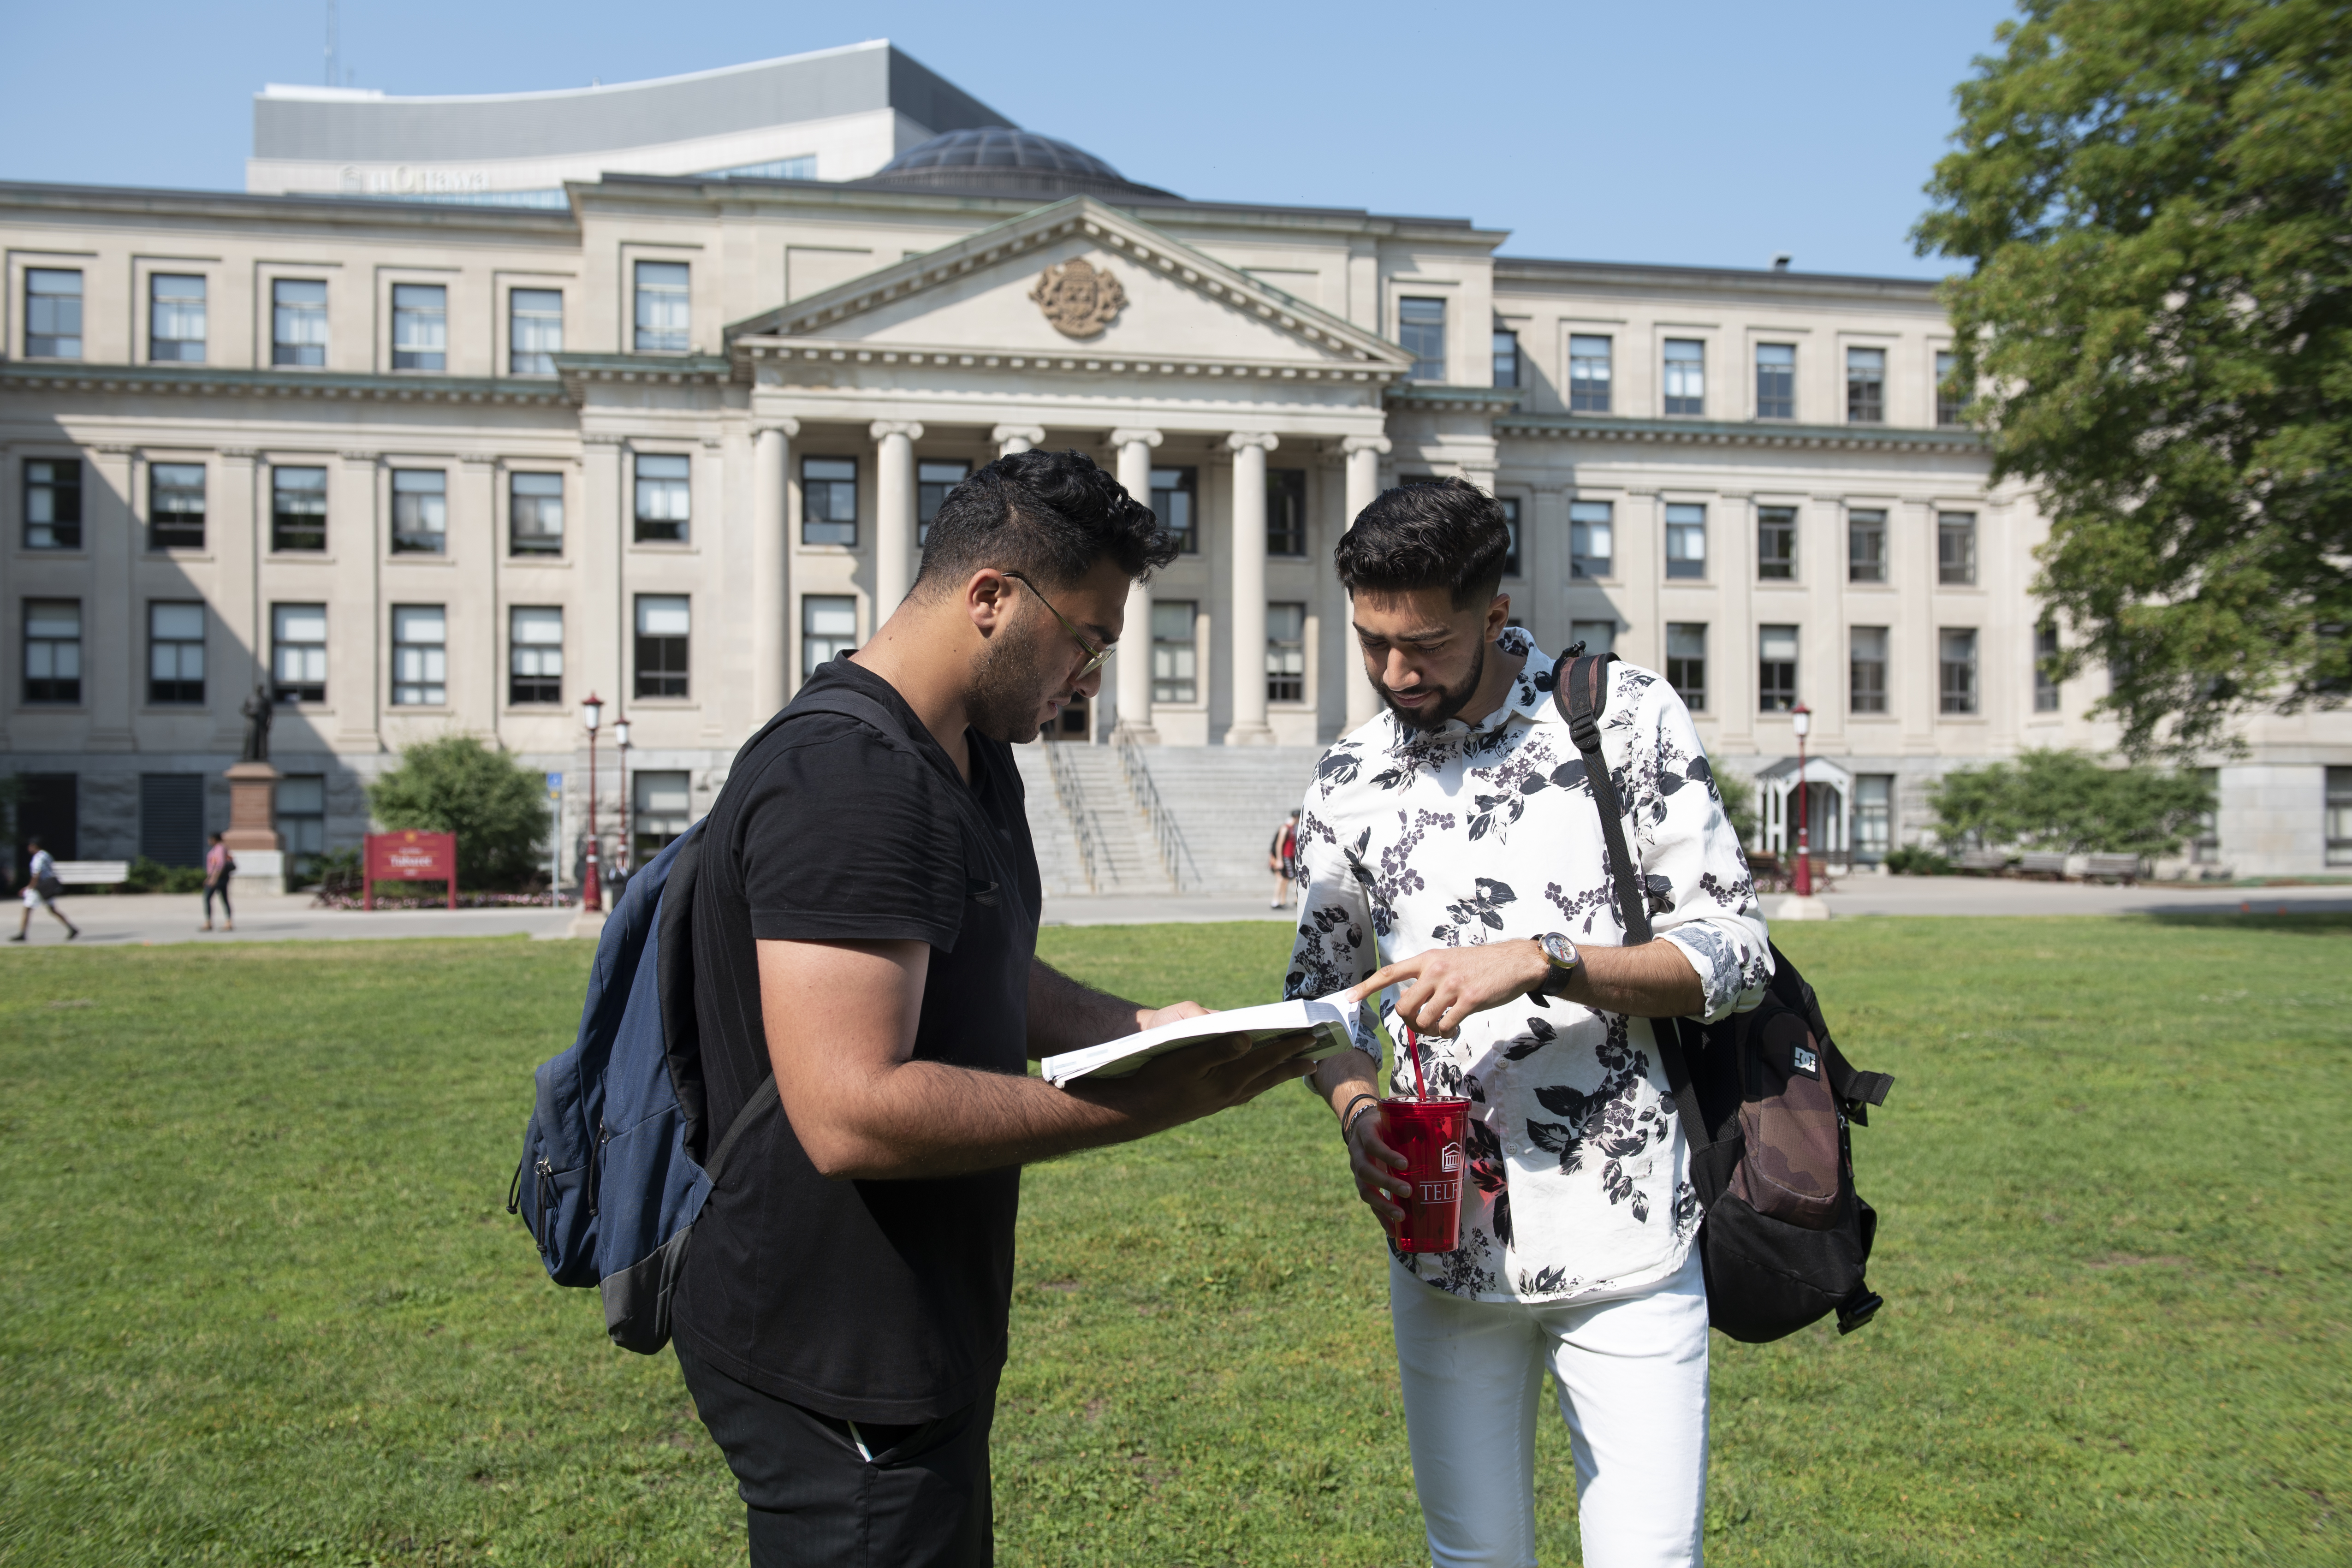 Telfer students studying on the Tabaret lawn with their textbooks